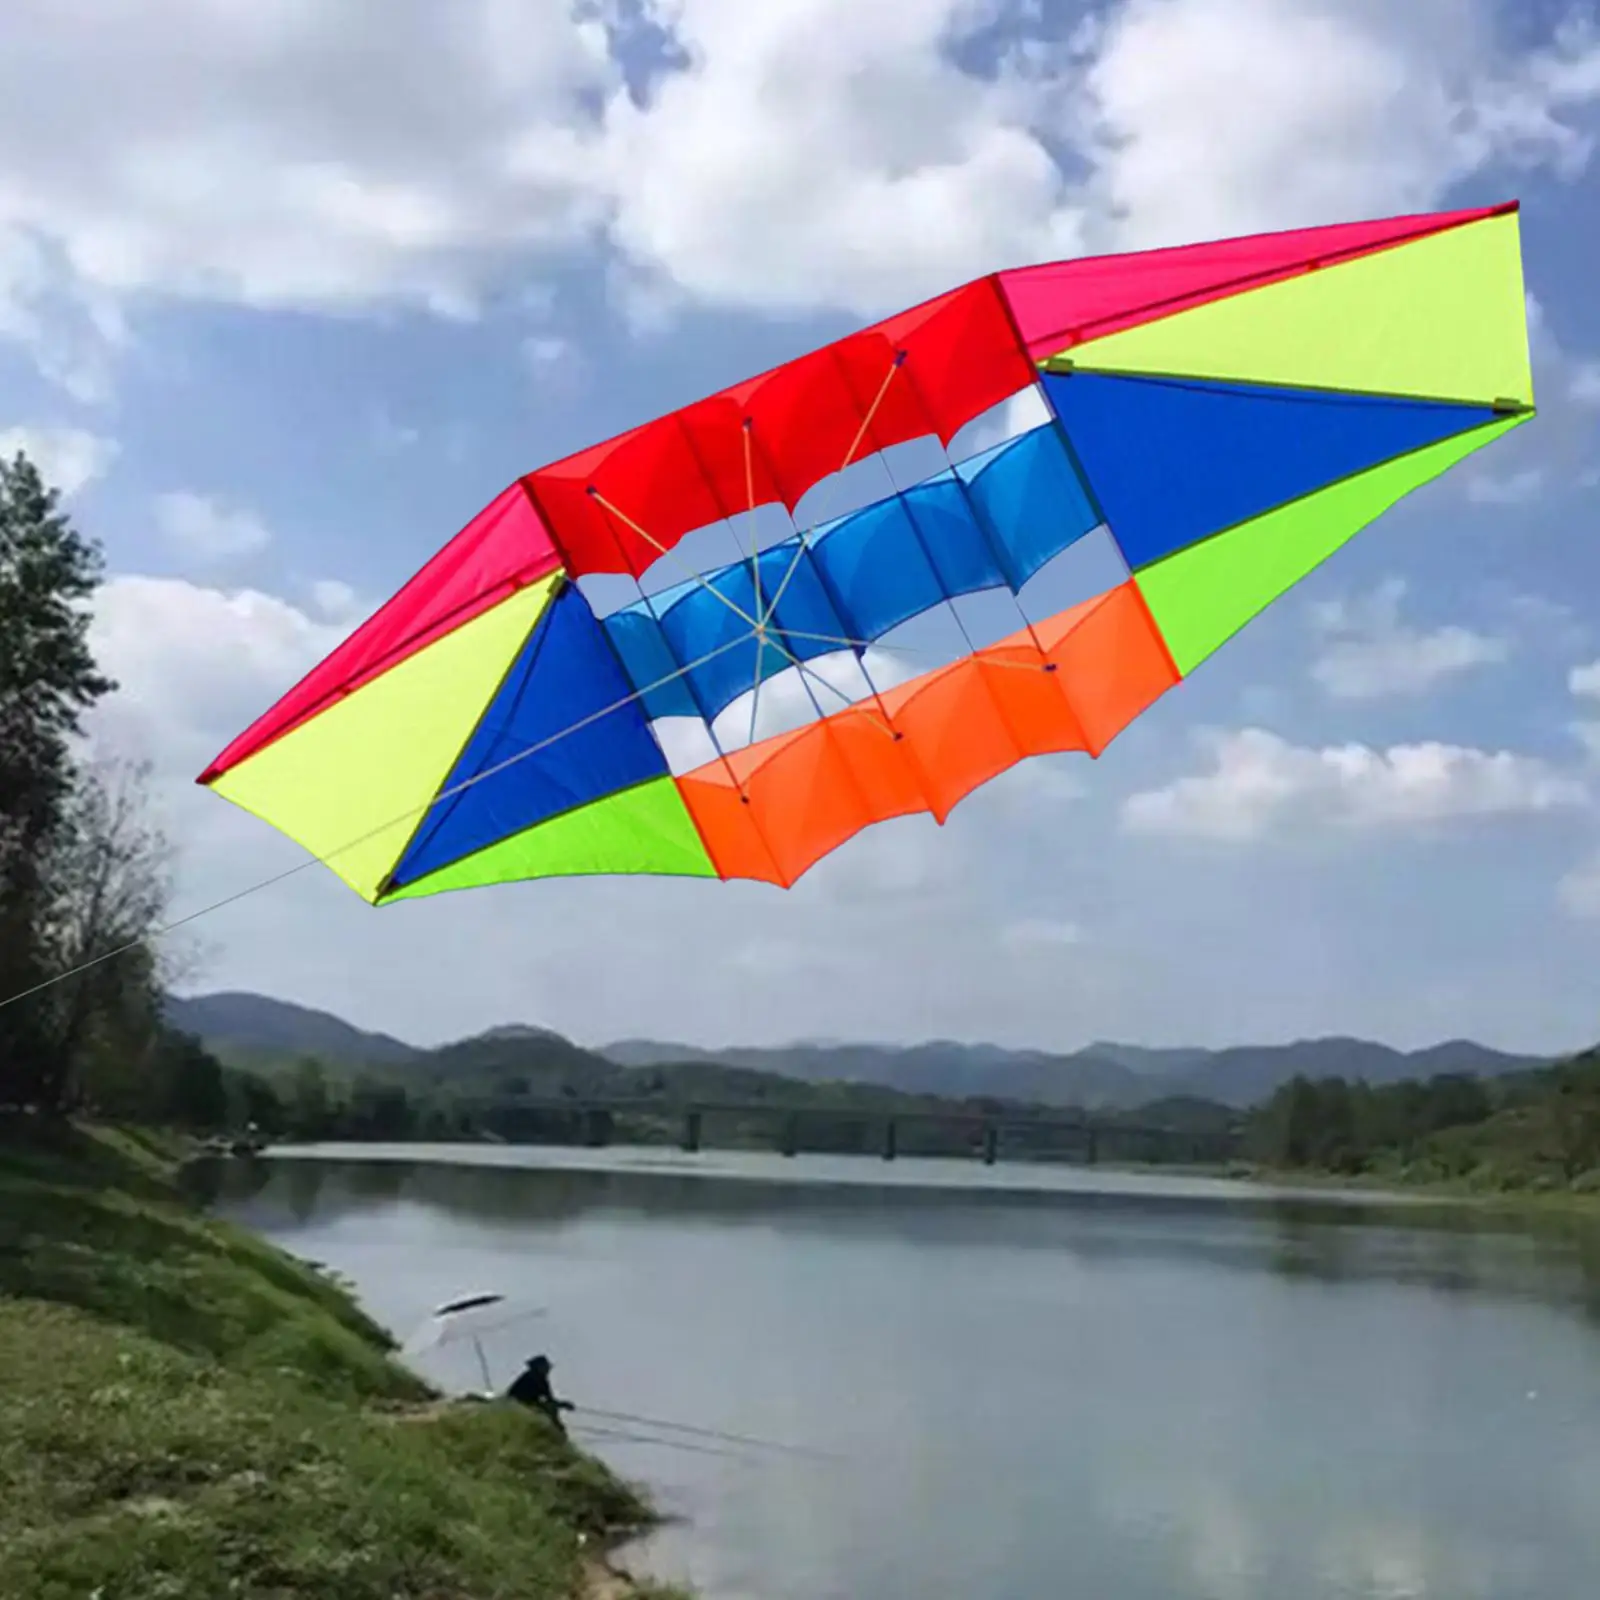 250Cmx80cm Single Line s Outdoor Easy to Fly Parachute Colorful  Toy for Children Girls Boys Kids Adults